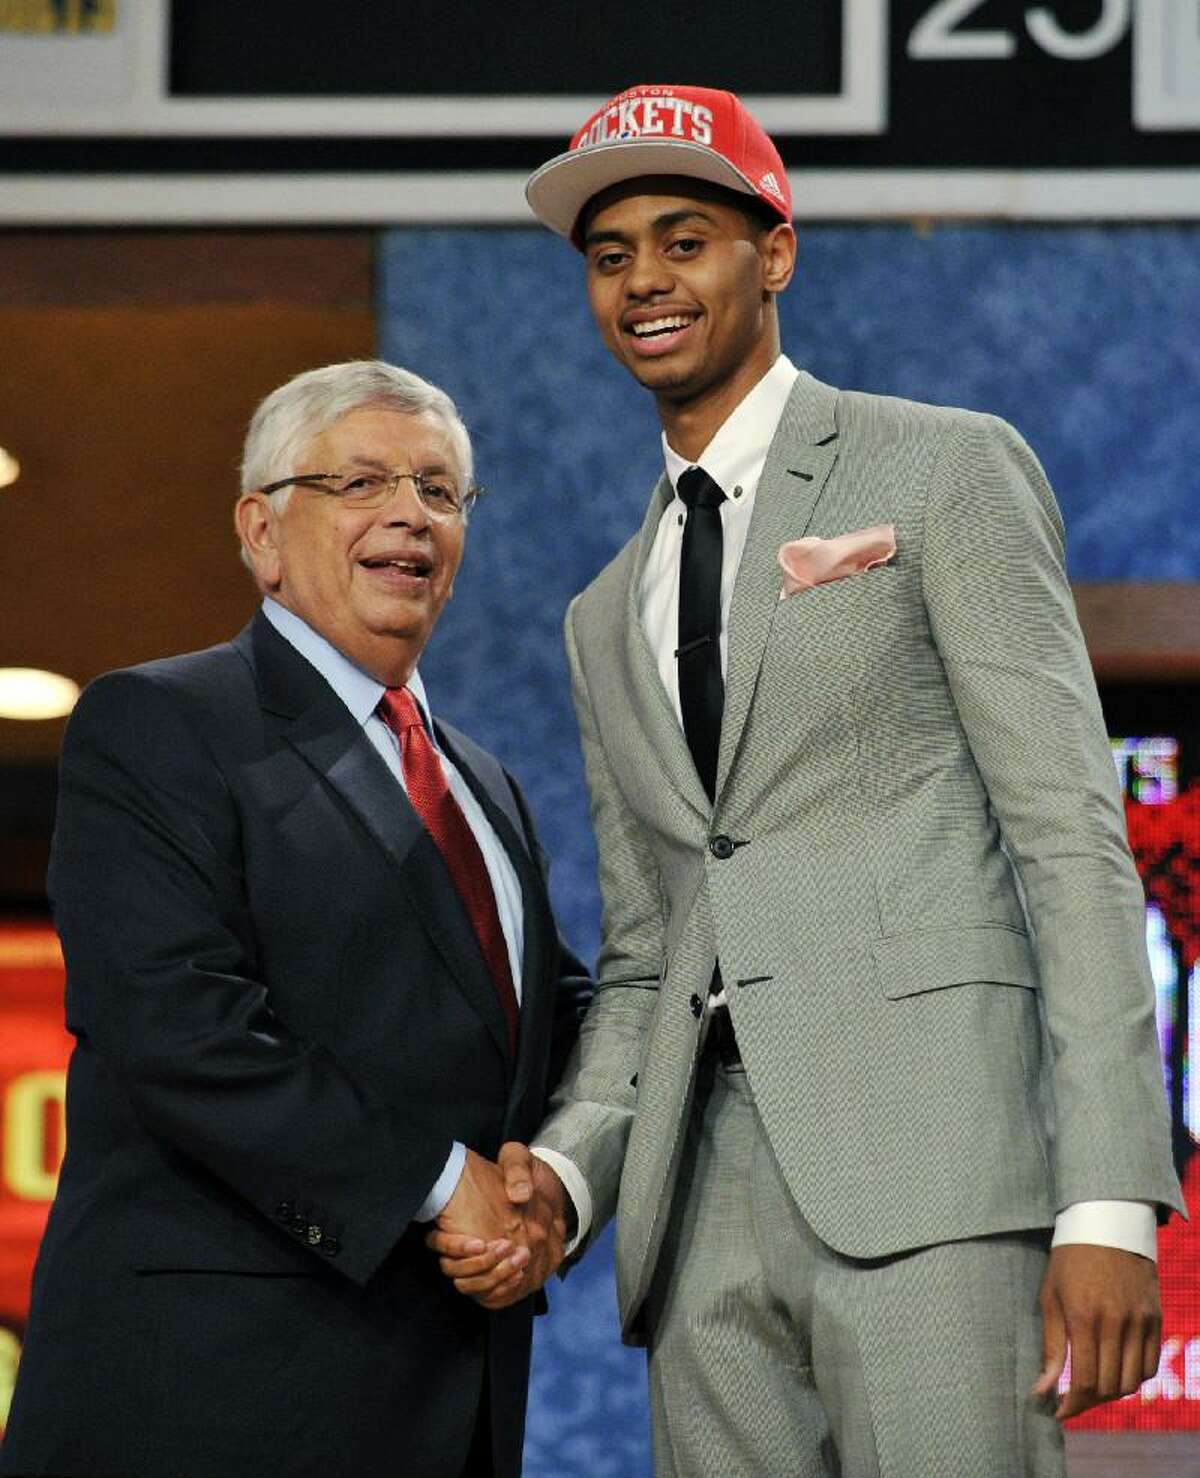 ASSOCIATED PRESS NBA Commissioner David Stern, left, poses with Jeremy Lamb, of Connecticut, the No. 12 overall draft pick by the Houston Rockets in the NBA Draft on Thursday night at the Prudential Center in Newark, N.J.